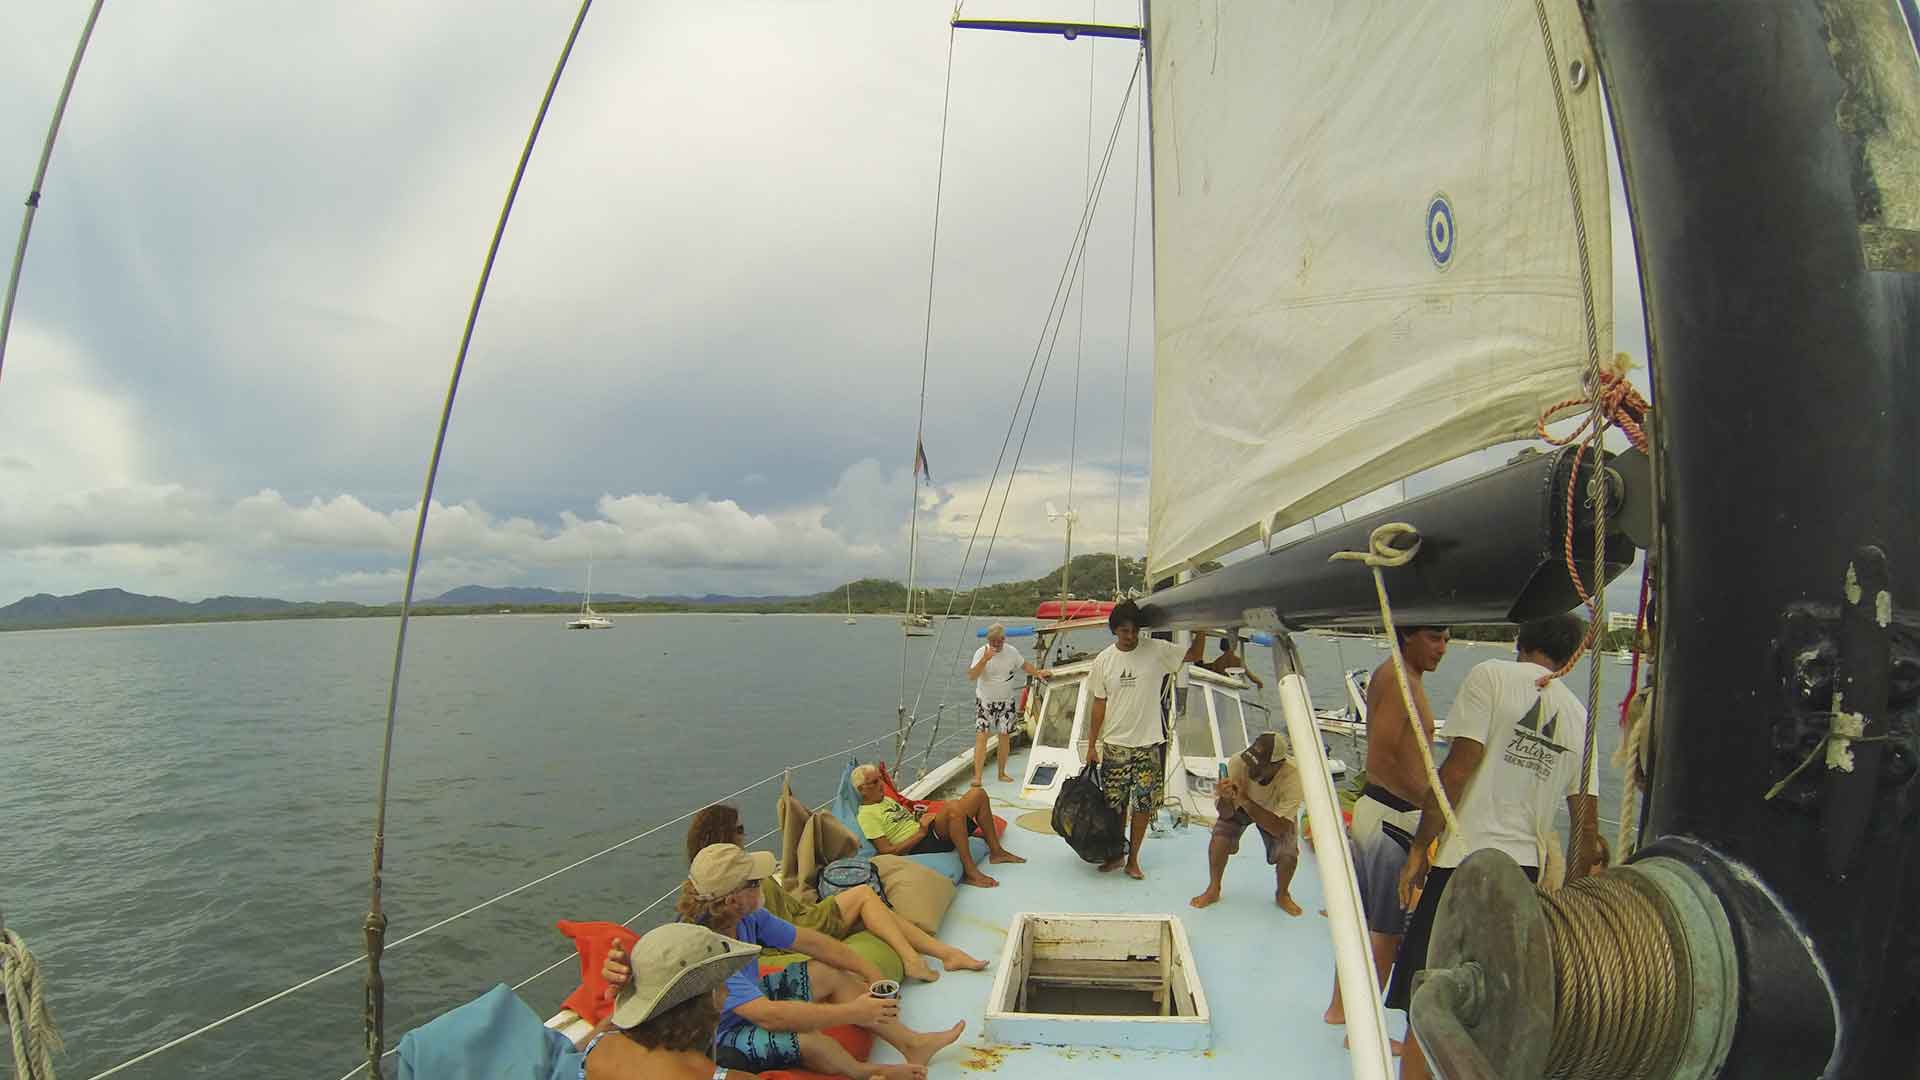 Tourists relaxing on beanbags during a sunset sailing cruise in Playa Grande, Costa Rica